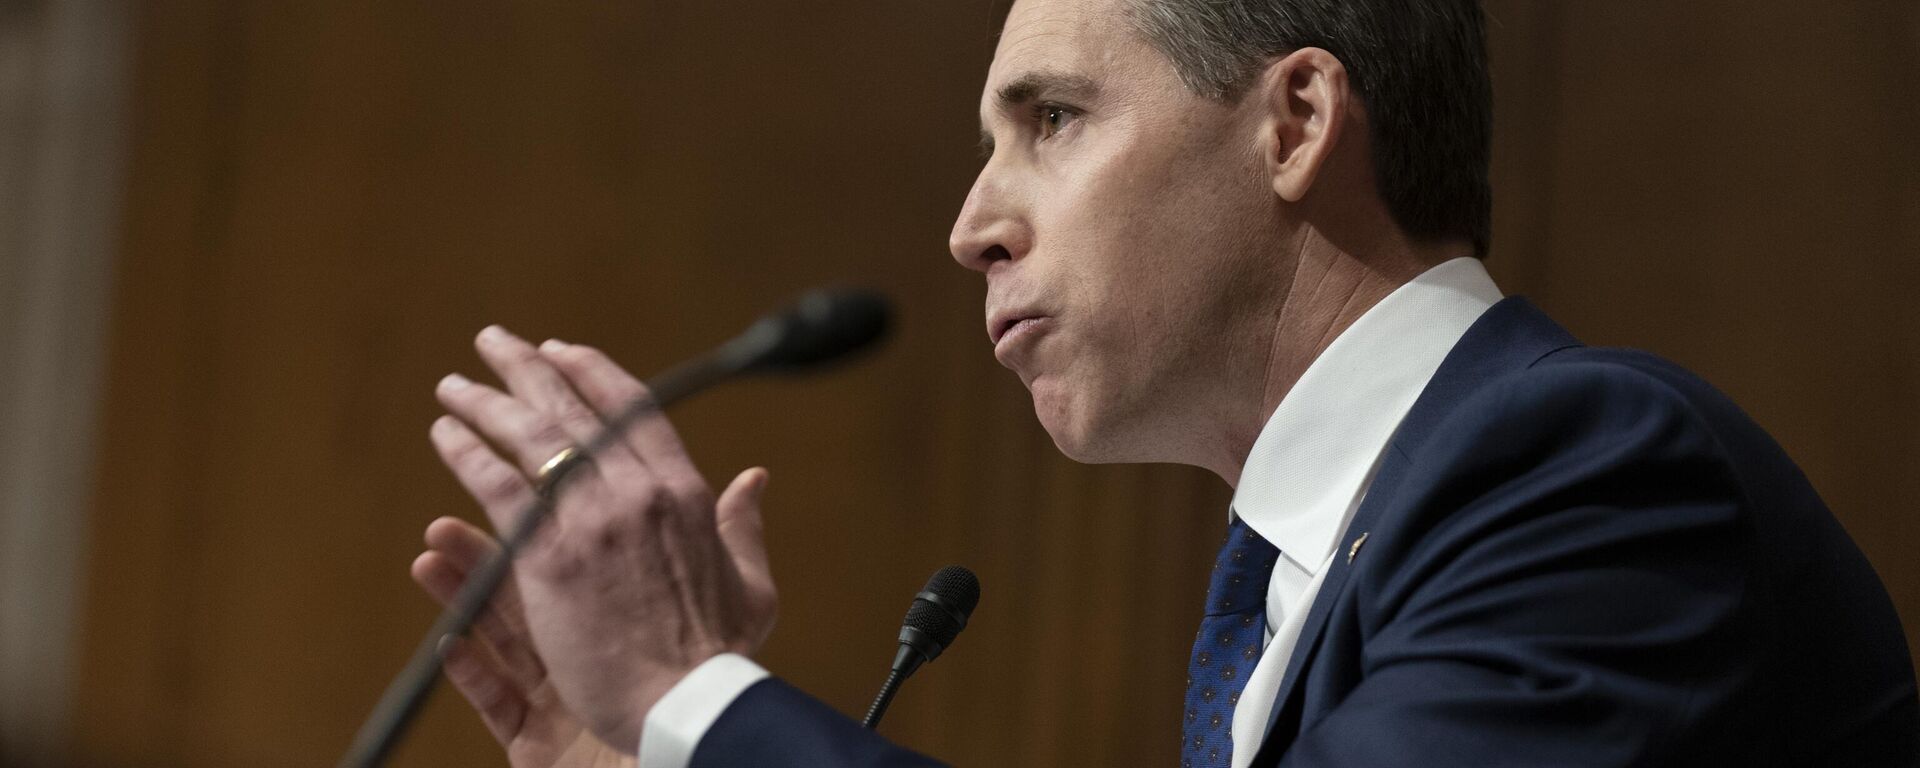 Sen. Josh Hawley, R-Mo., questions Colleen Shogan, nominee to be archivist of the U.S. National Archives and Records Administration, Tuesday, Feb. 28, 2023. - Sputnik International, 1920, 21.03.2023